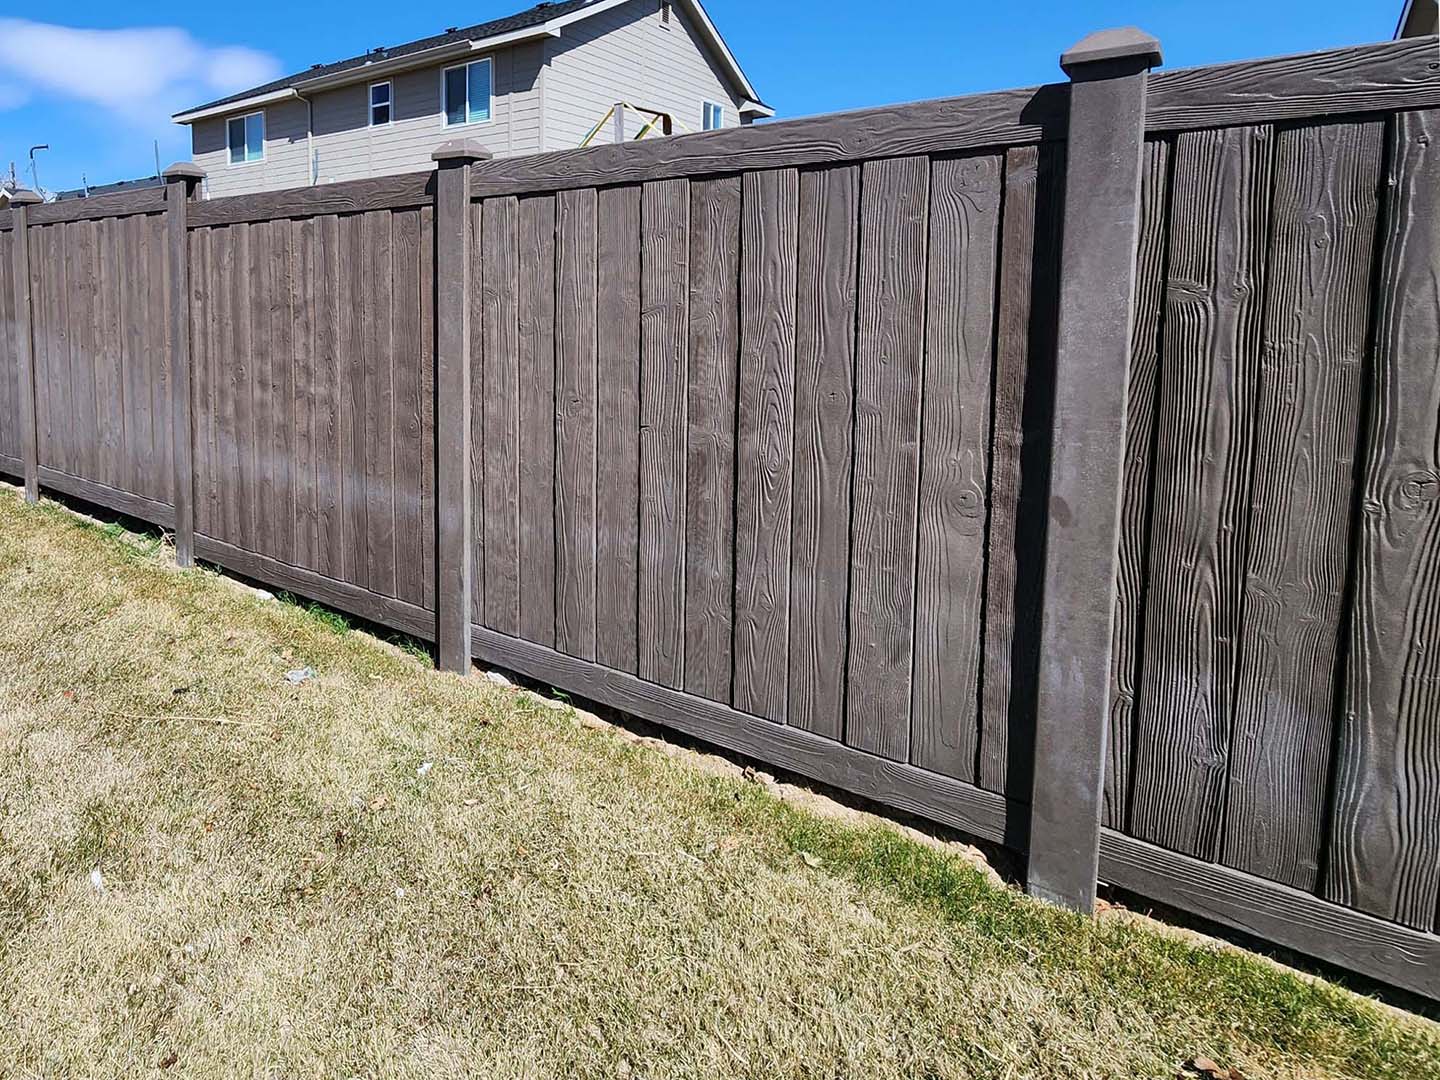 Vinyl fence options in the Caldwell, Idaho area.